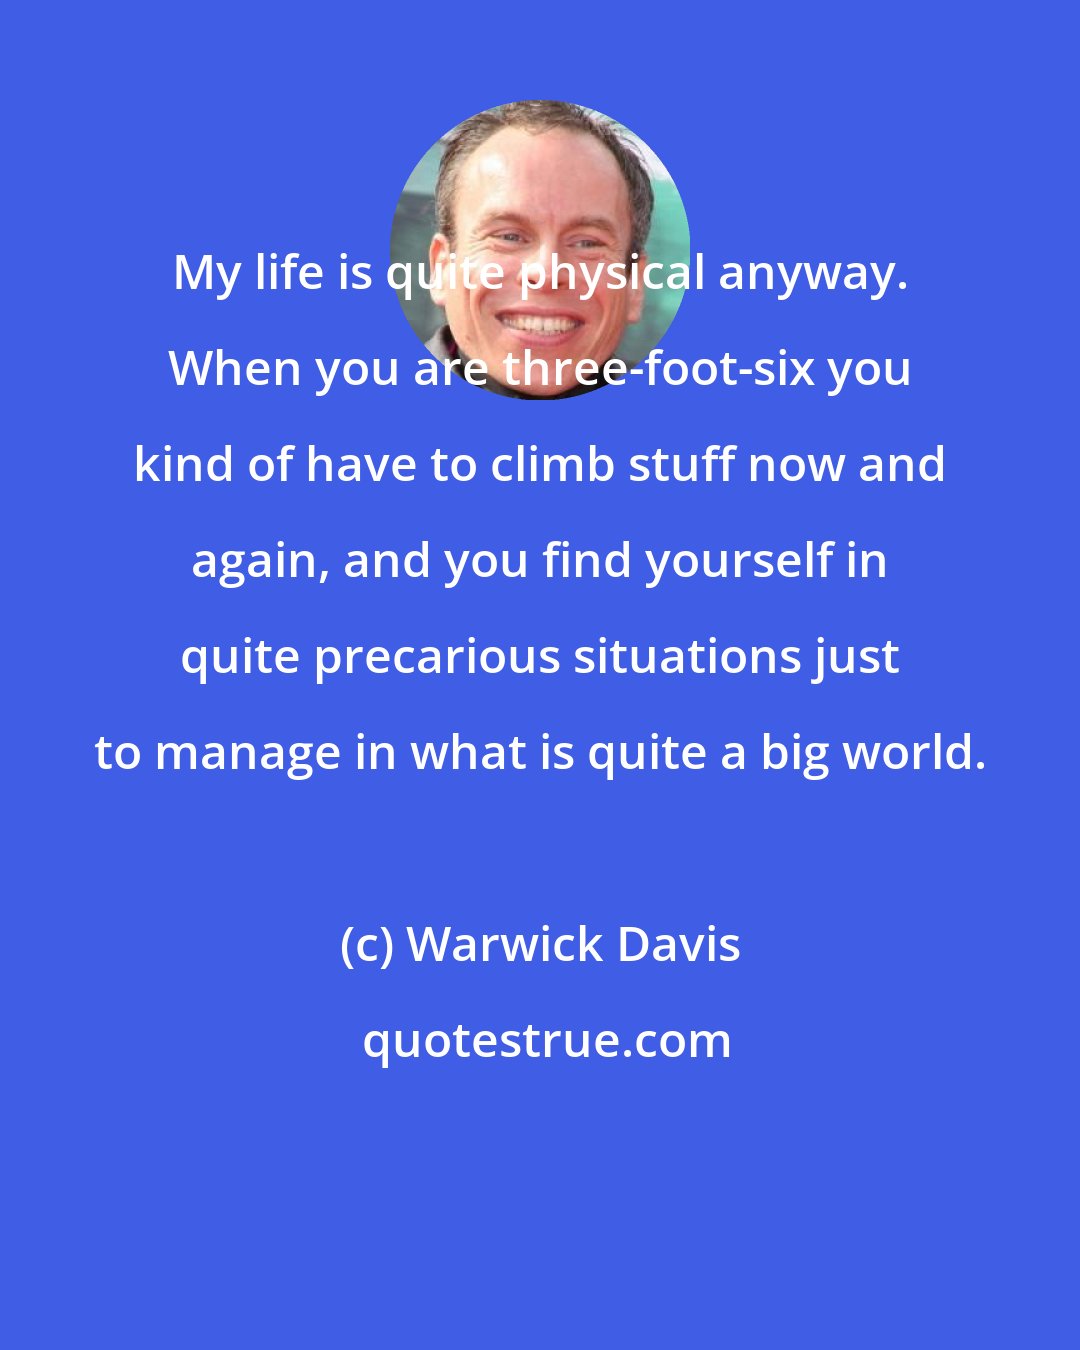 Warwick Davis: My life is quite physical anyway. When you are three-foot-six you kind of have to climb stuff now and again, and you find yourself in quite precarious situations just to manage in what is quite a big world.